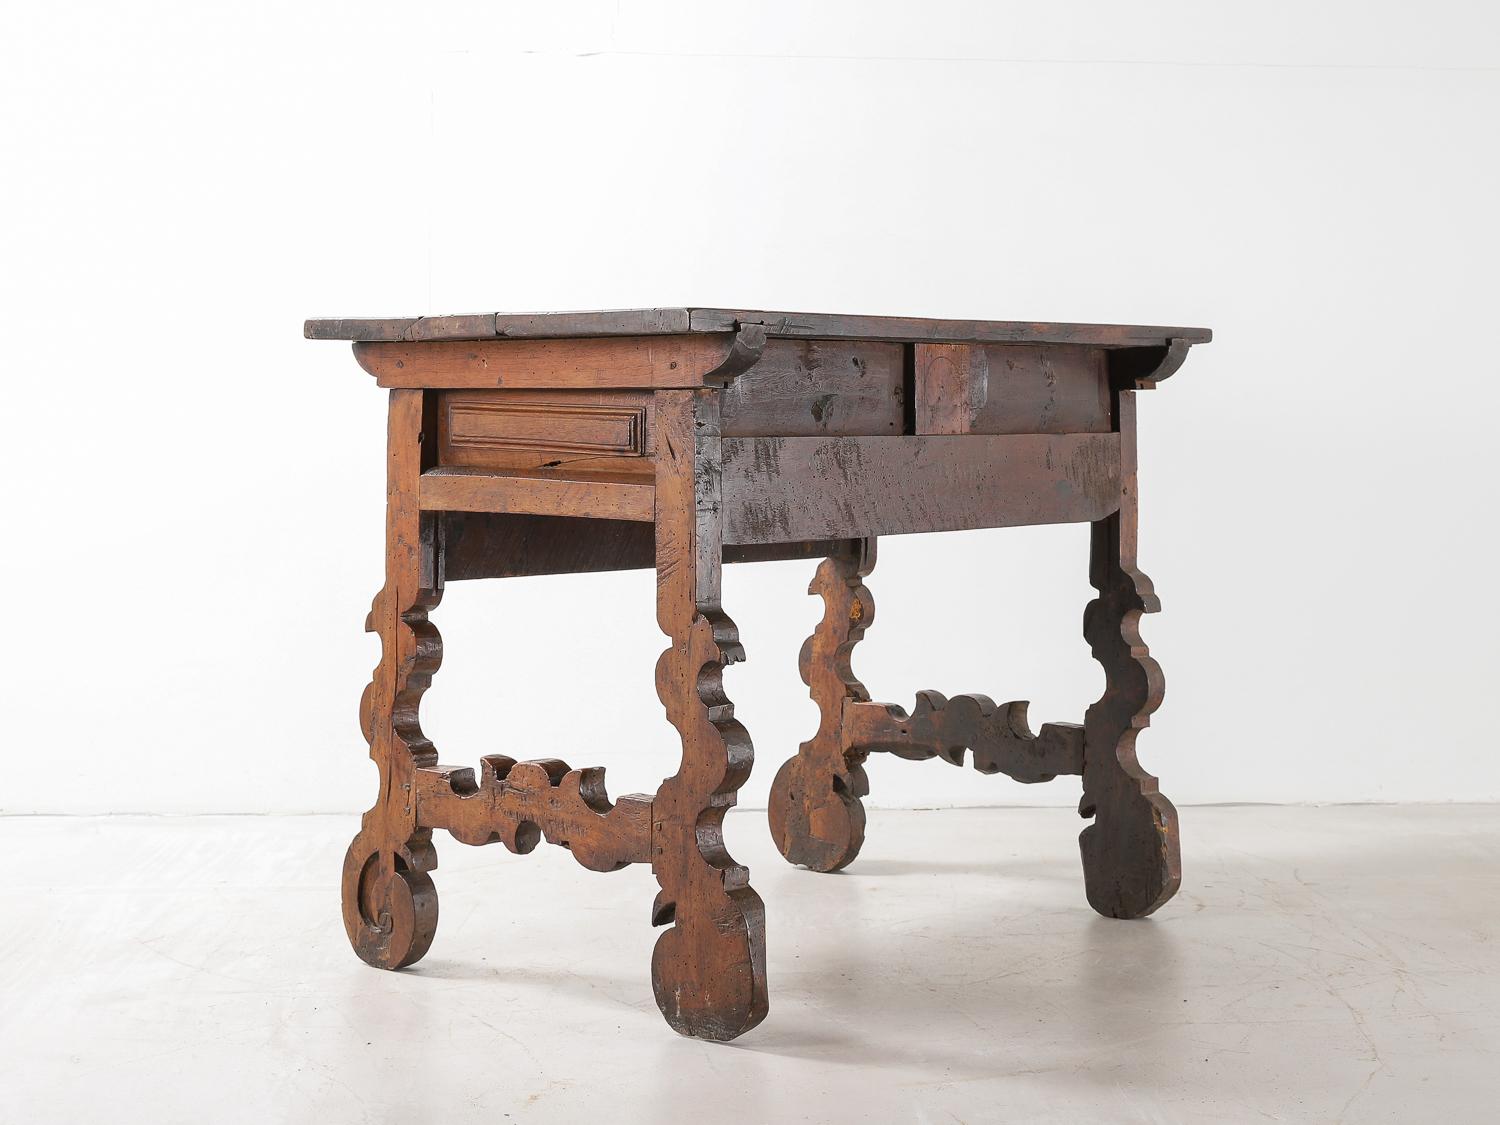 Spanish 18th Century Carved Walnut Table with Original Iron Pulls and Lyre Legs For Sale 1